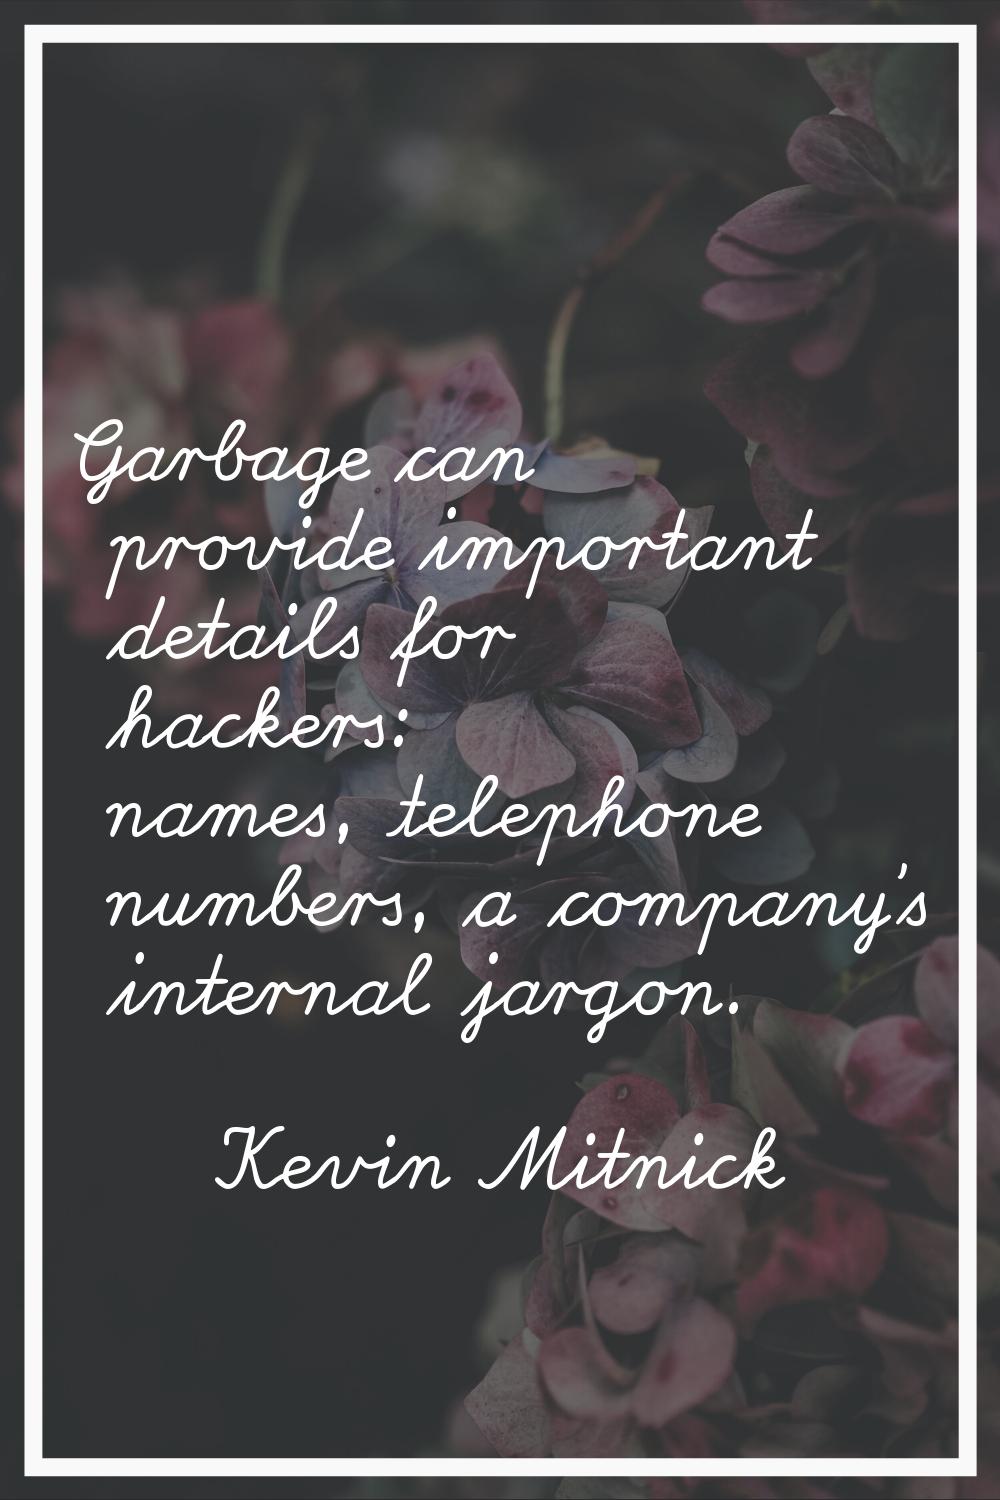 Garbage can provide important details for hackers: names, telephone numbers, a company's internal j